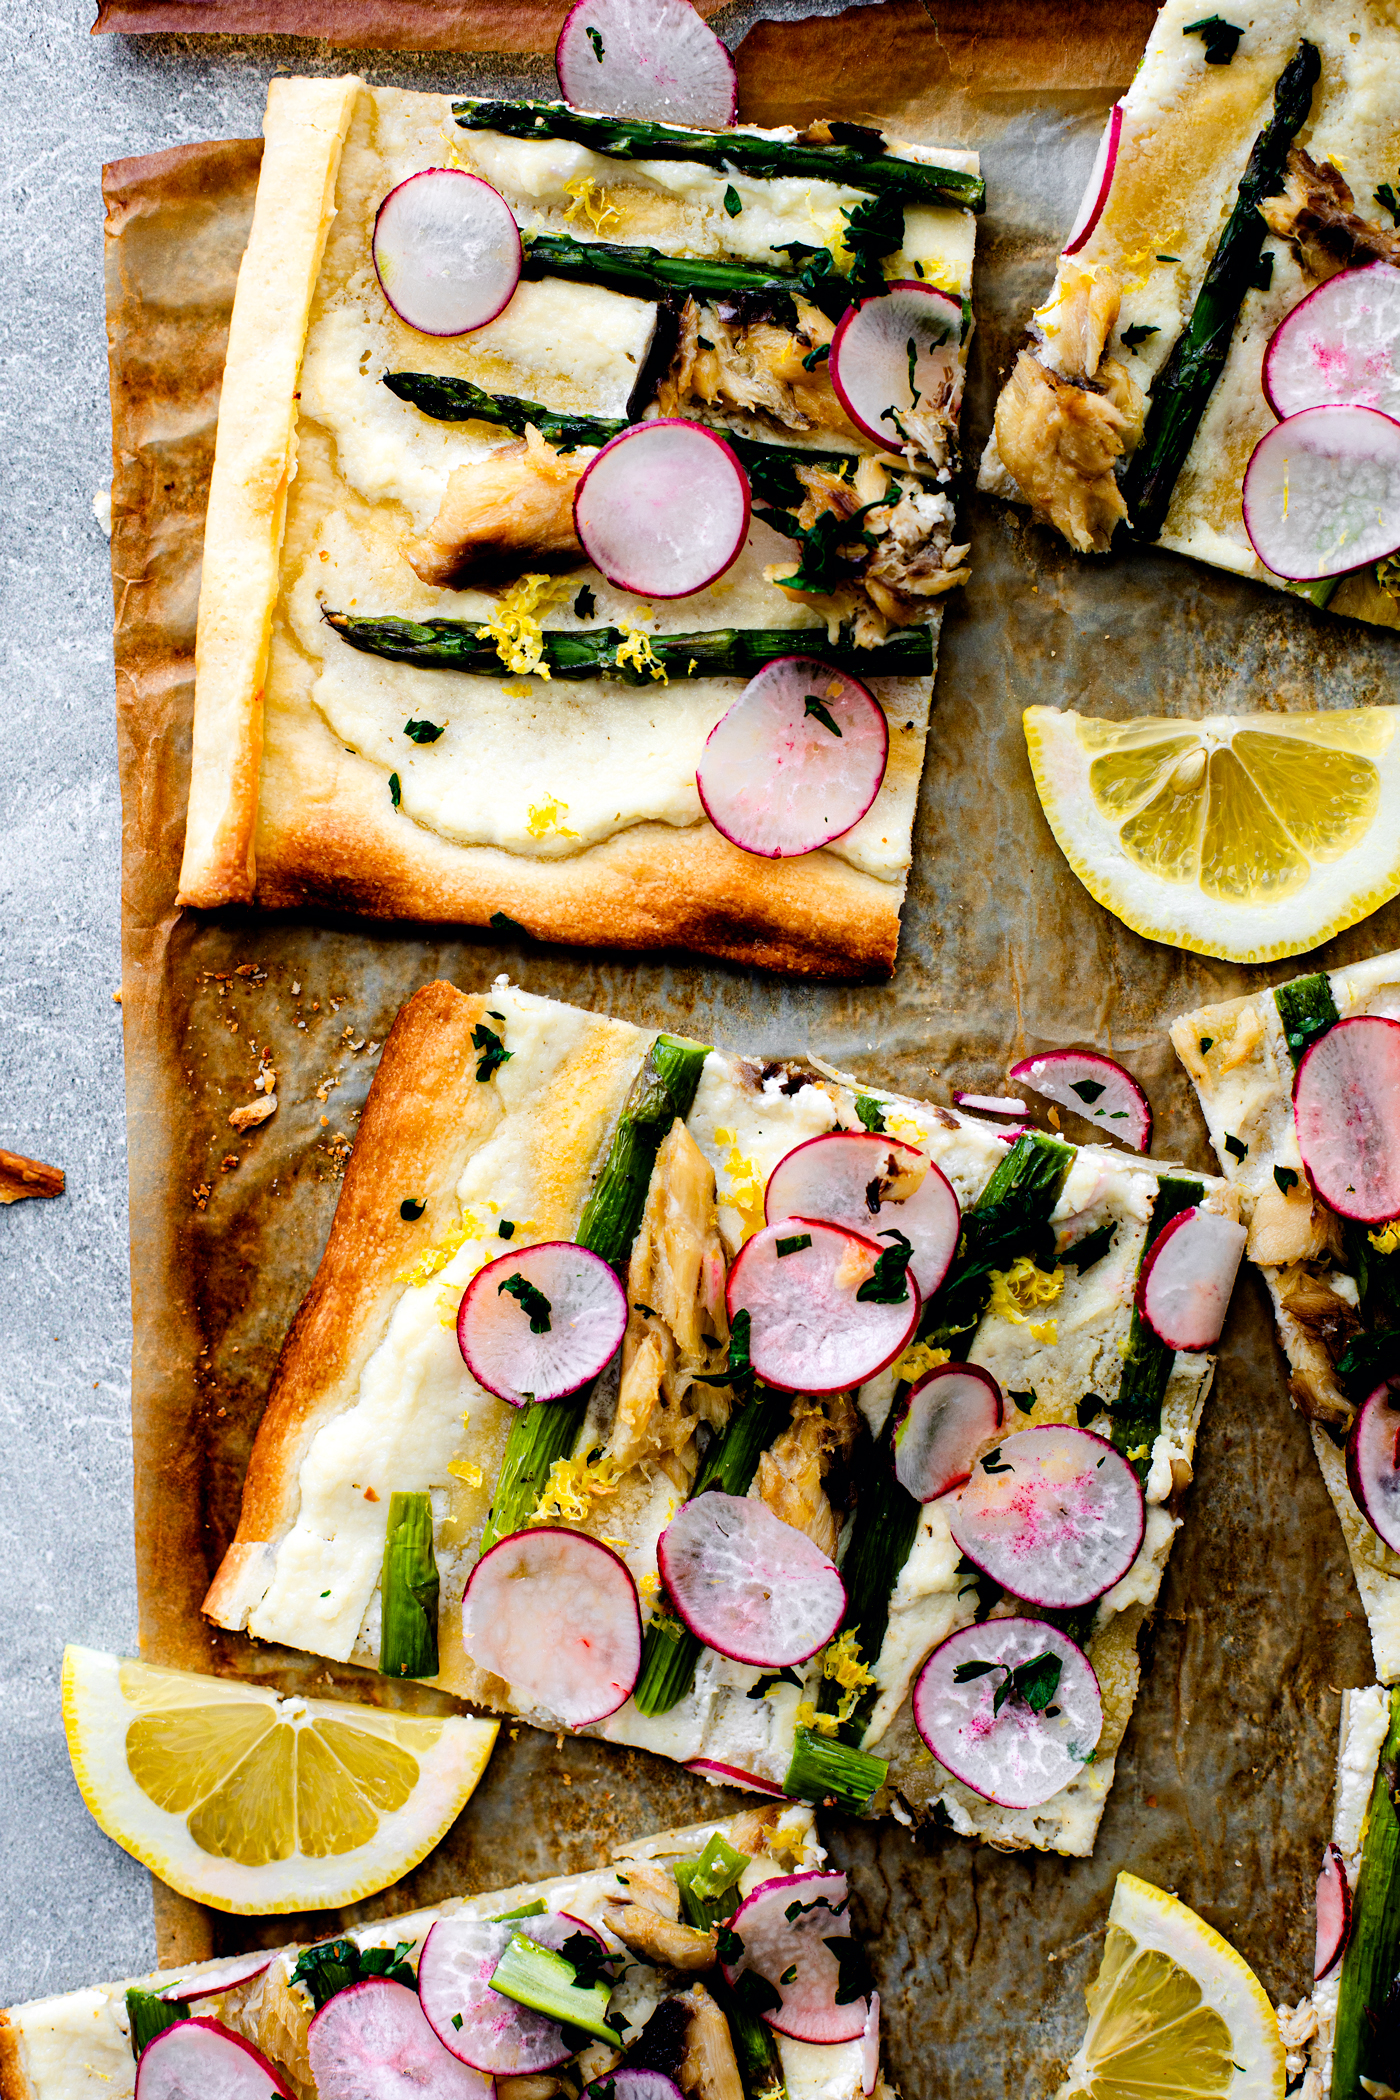 Cut up flatbread with asparagus, radishes, and mackerel.